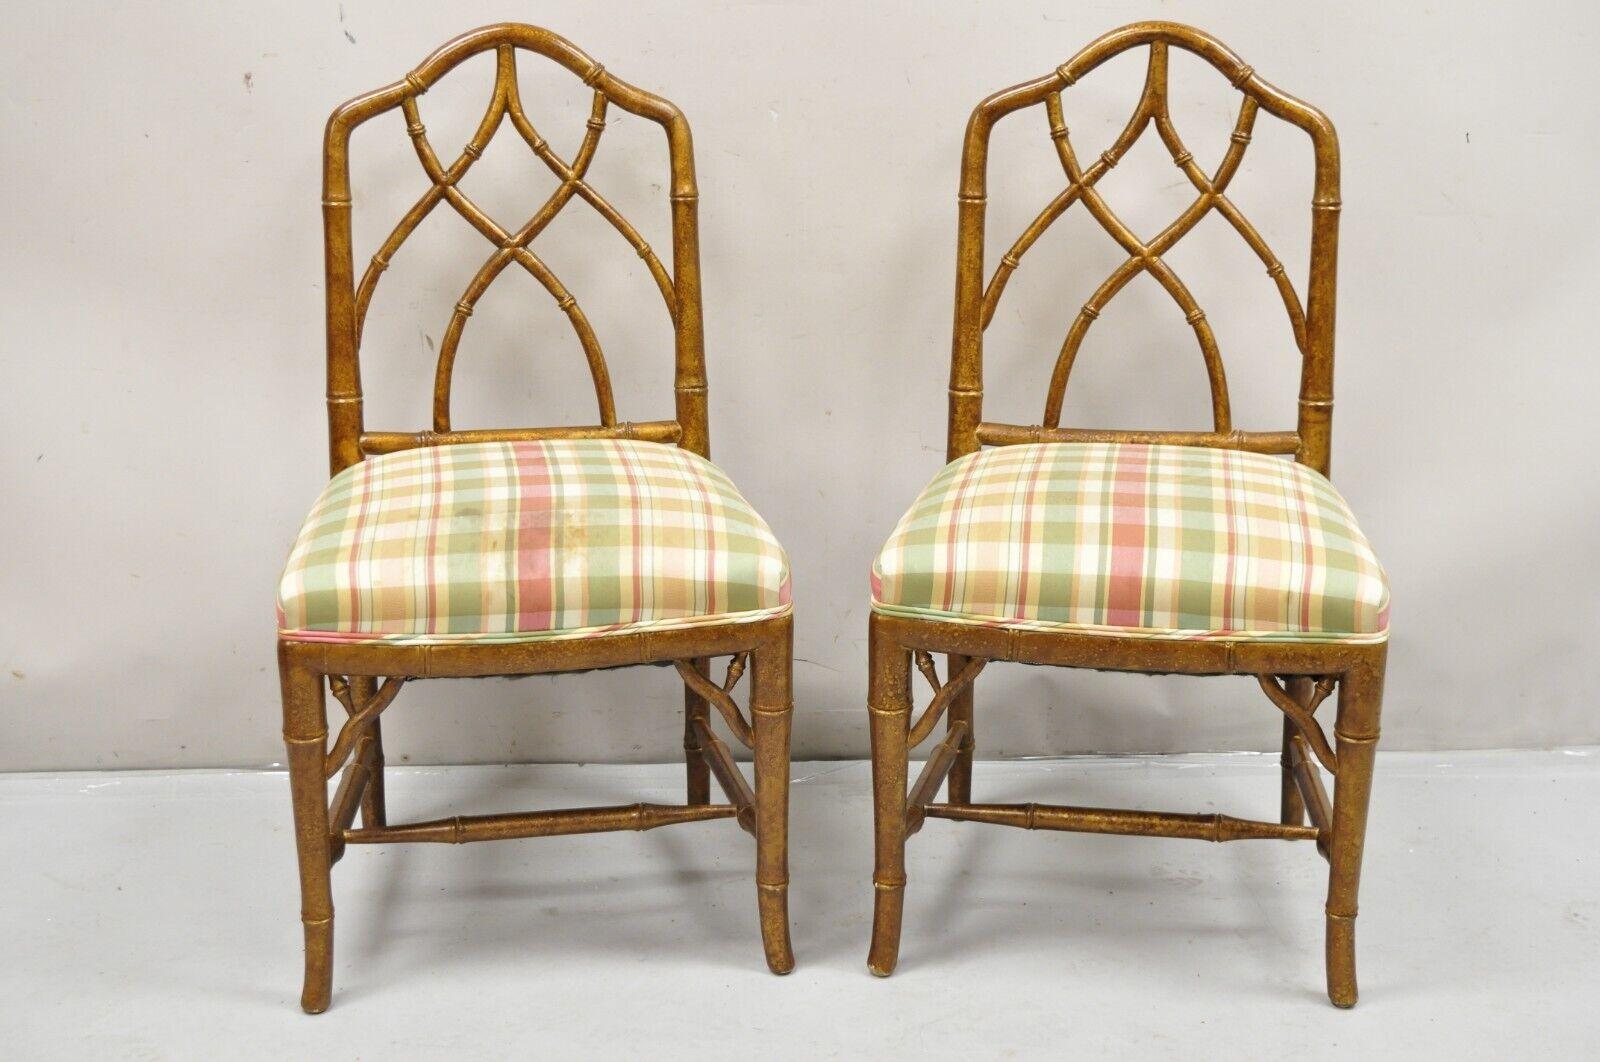 Vintage Chinese Chippendale Faux Bamboo Gold Gilt Hollywood Regency Side Chairs - a Pair. Item features solid wood frames, distressed gold gilt finish, stretcher base, quality American craftsmanship, great style and form. Mid 20th Century.